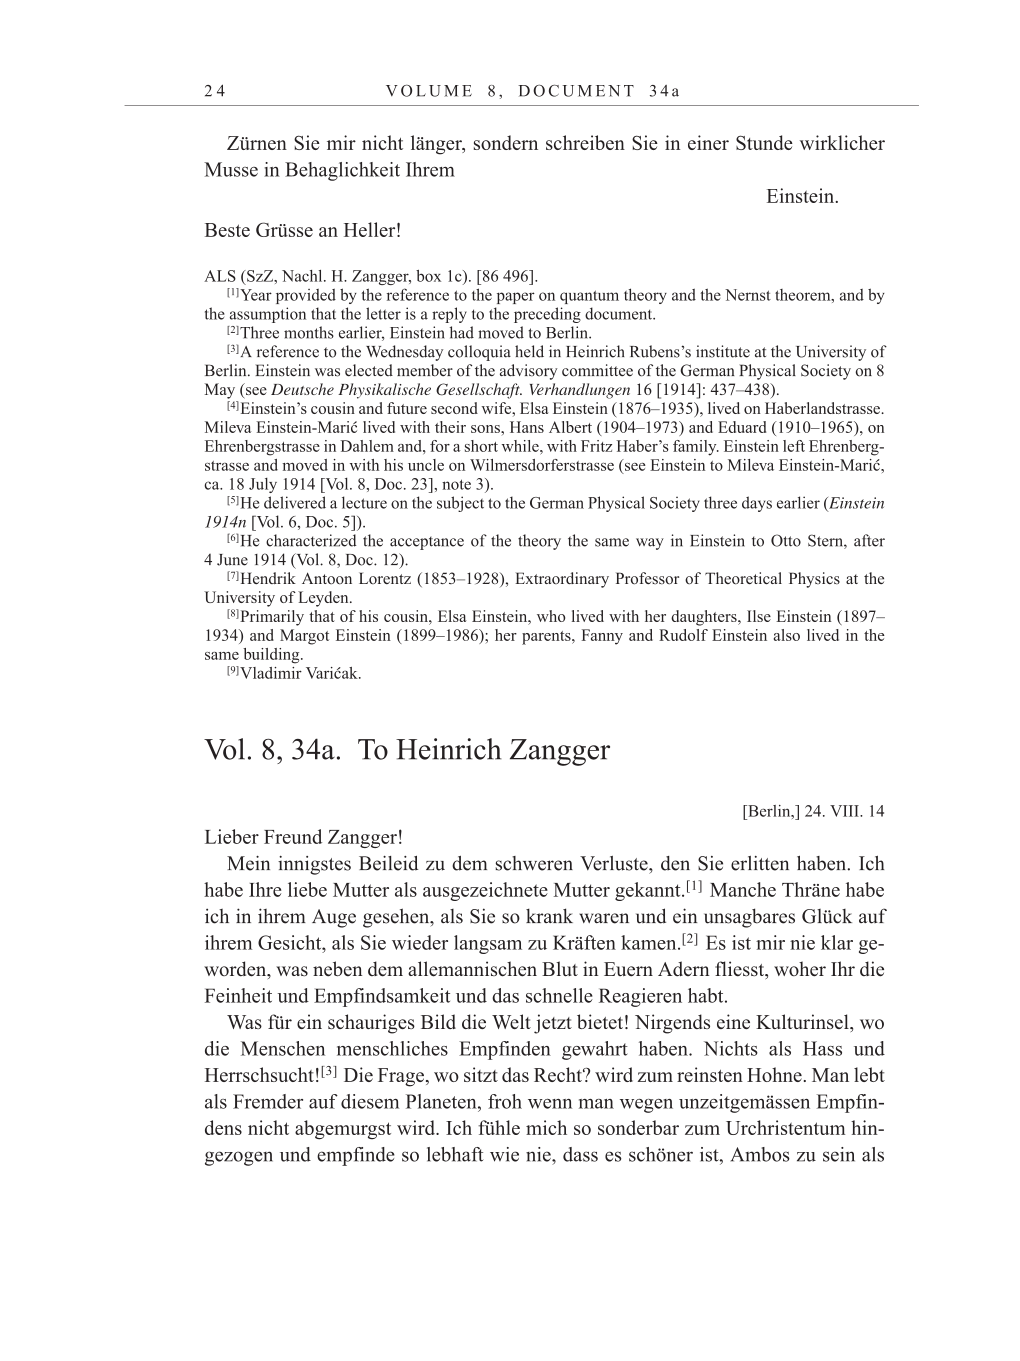 Volume 10: The Berlin Years: Correspondence May-December 1920 / Supplementary Correspondence 1909-1920 page 24